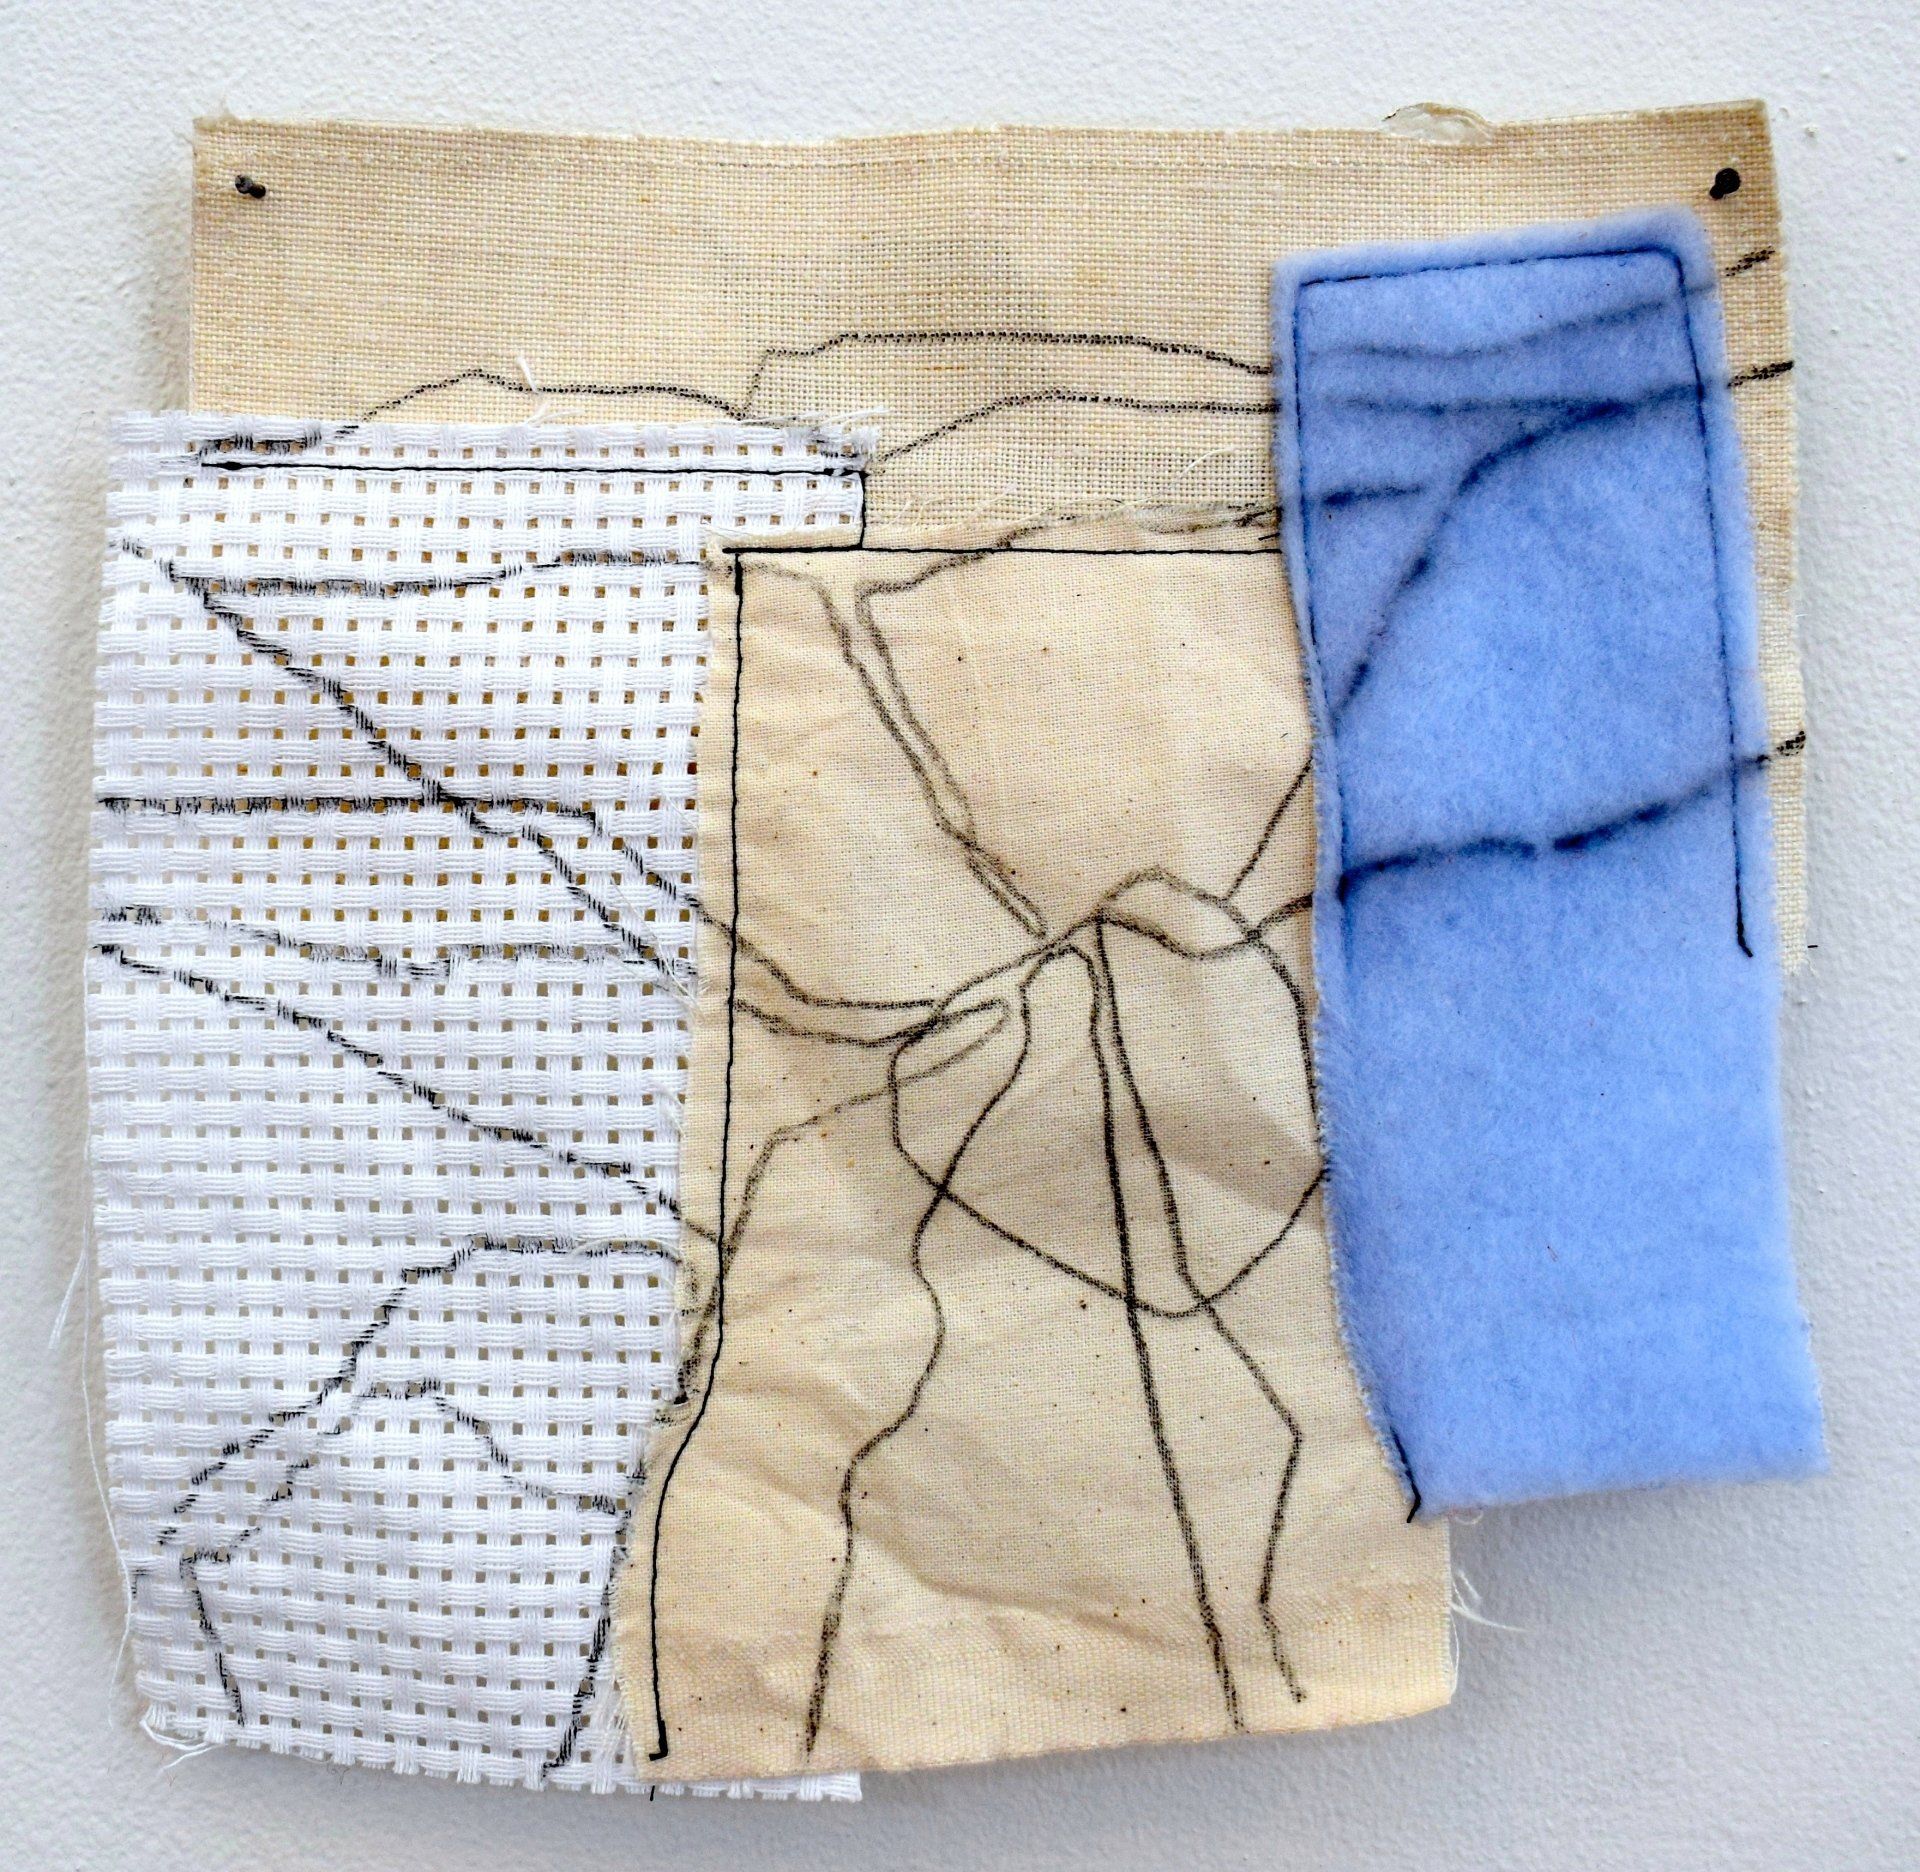 Small abstract line drawing on material. Blue, cream background